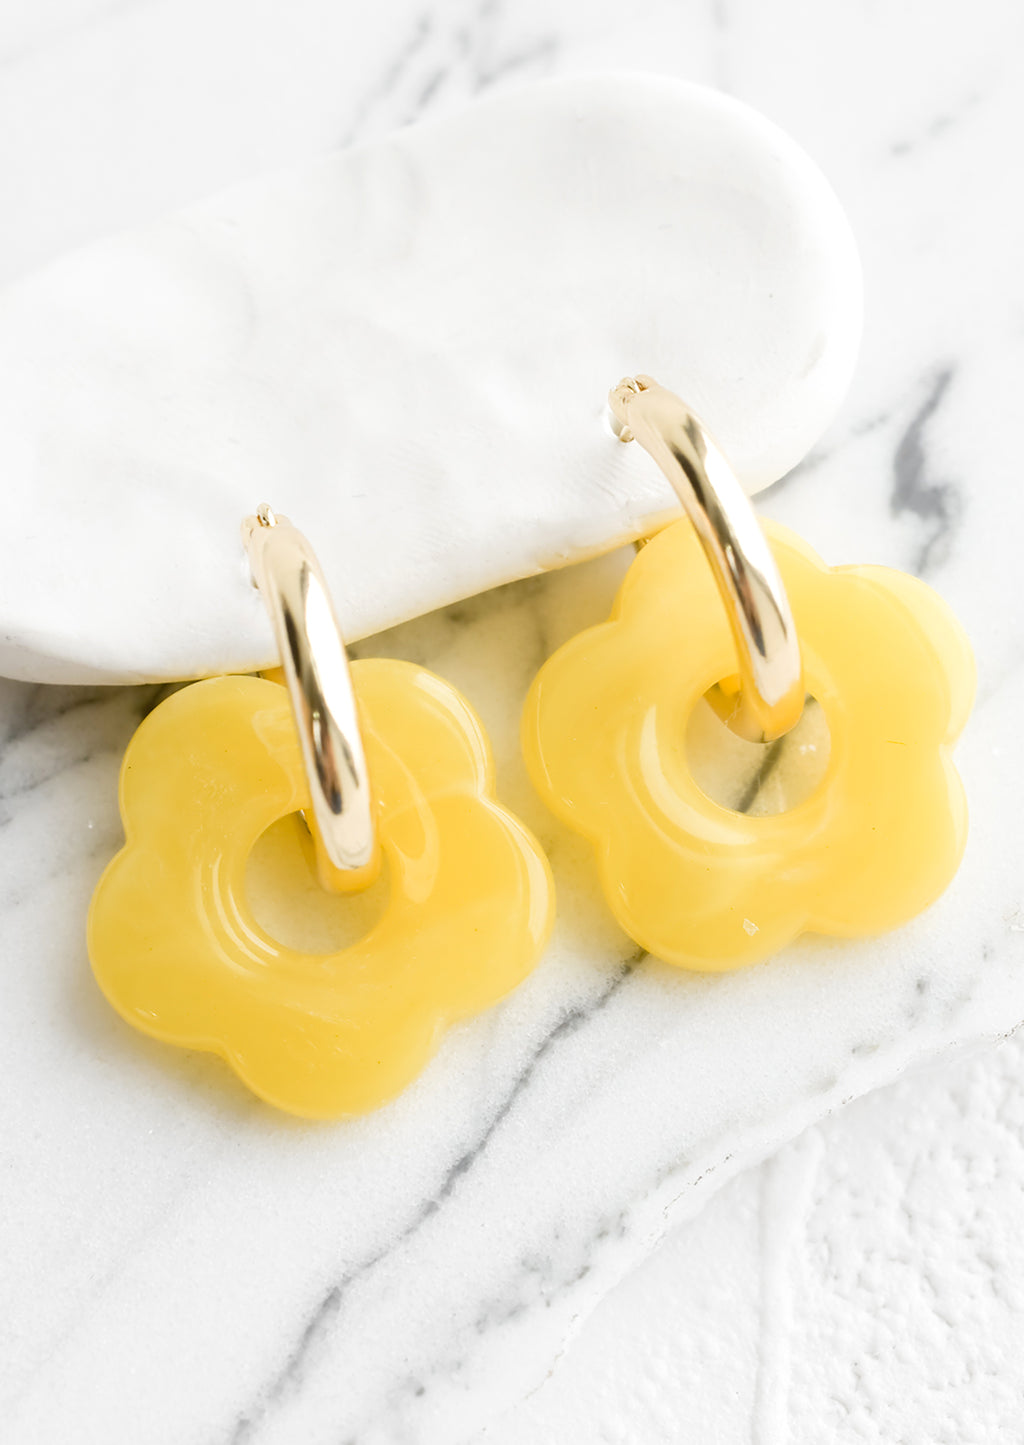 Lemon: A pair of earrings with gold huggie hoop base and yellow flower charm.